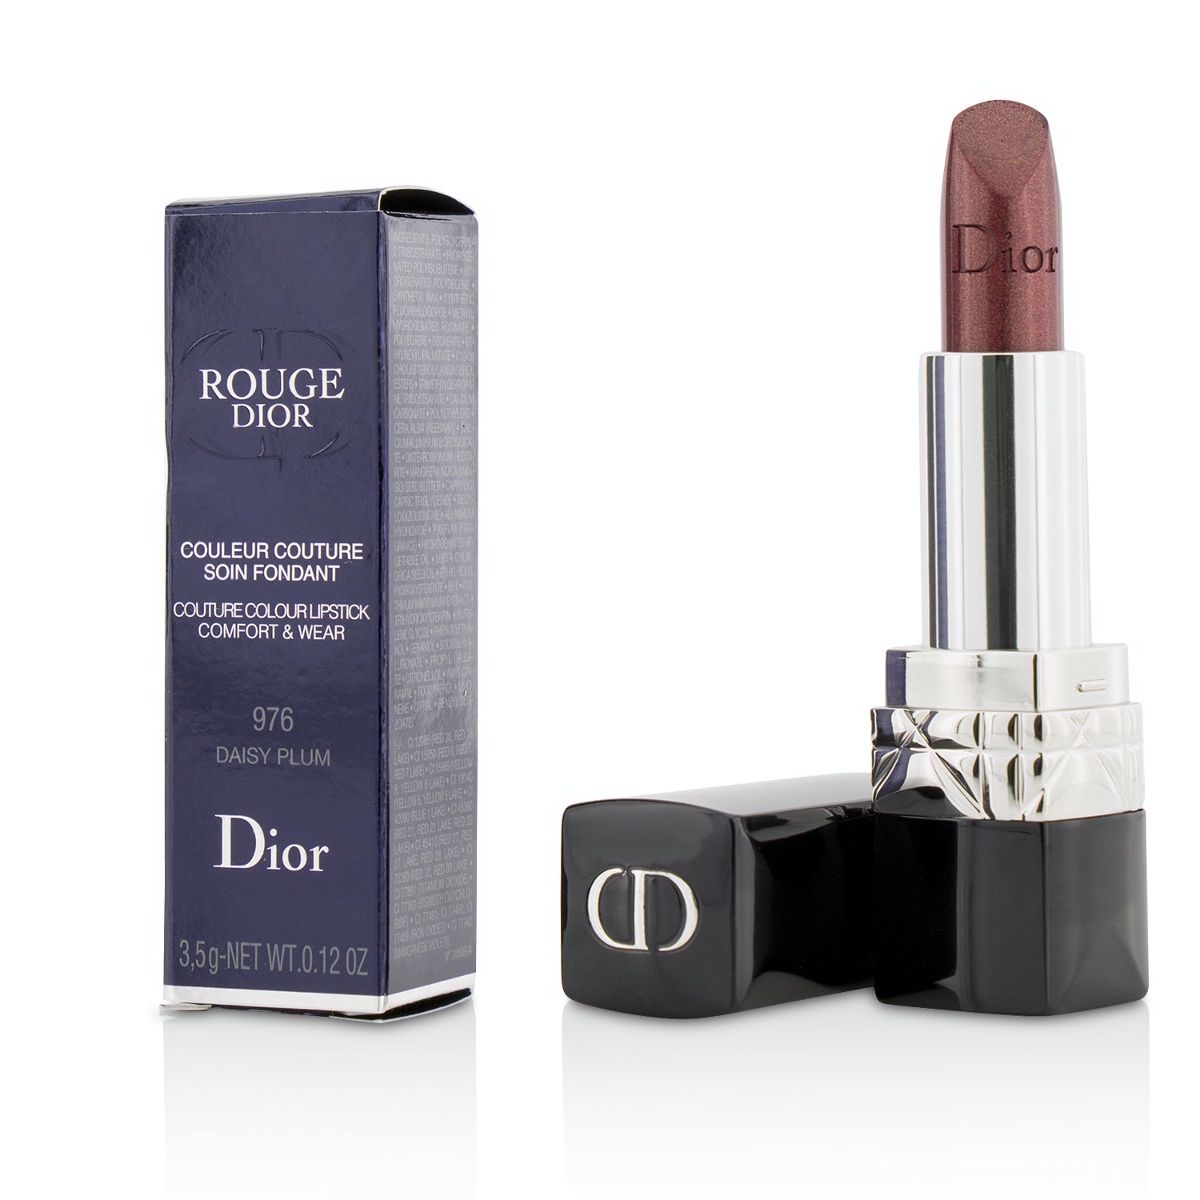 Rouge Dior Couture Colour Comfort  Wear Lipstick - # 976 Daisy Plum Christian Dior Image